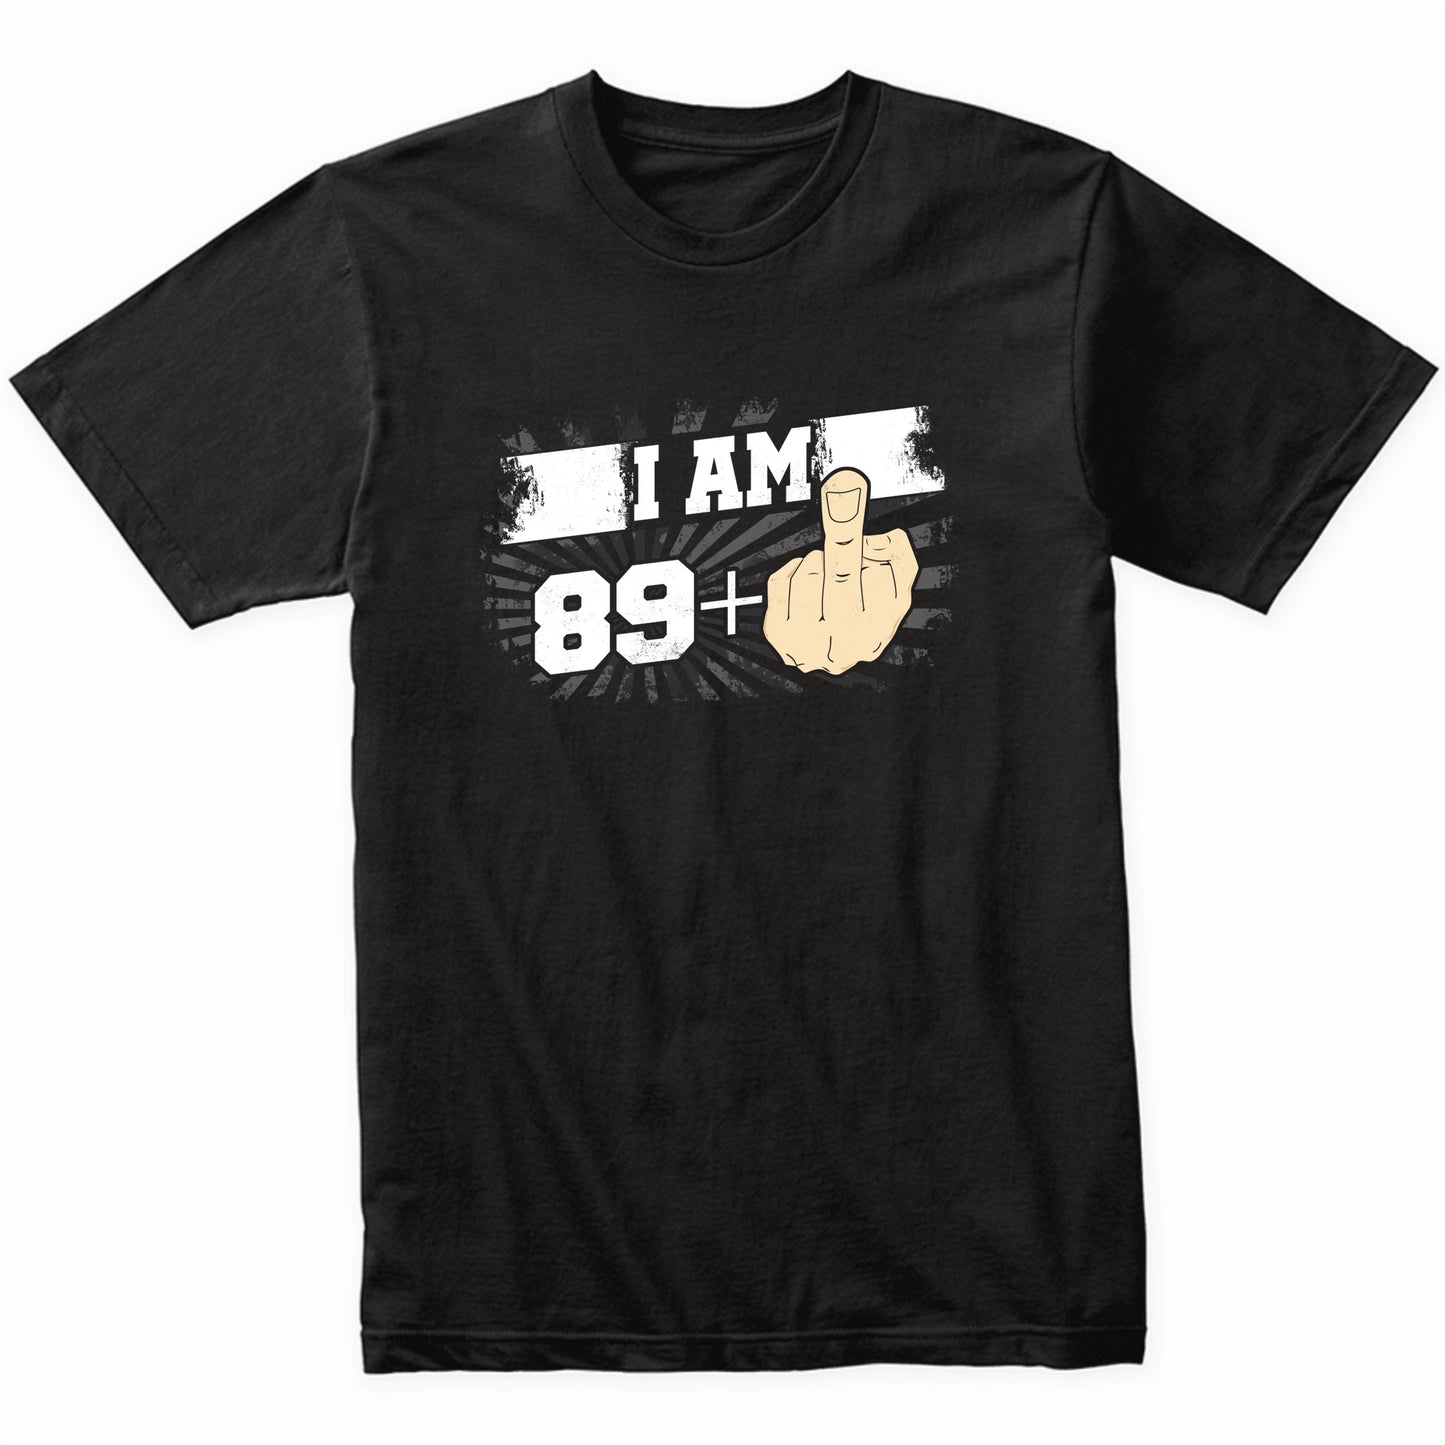 90th Birthday Shirt For Men - I Am 89 Plus Middle Finger 90 Years Old T-Shirt